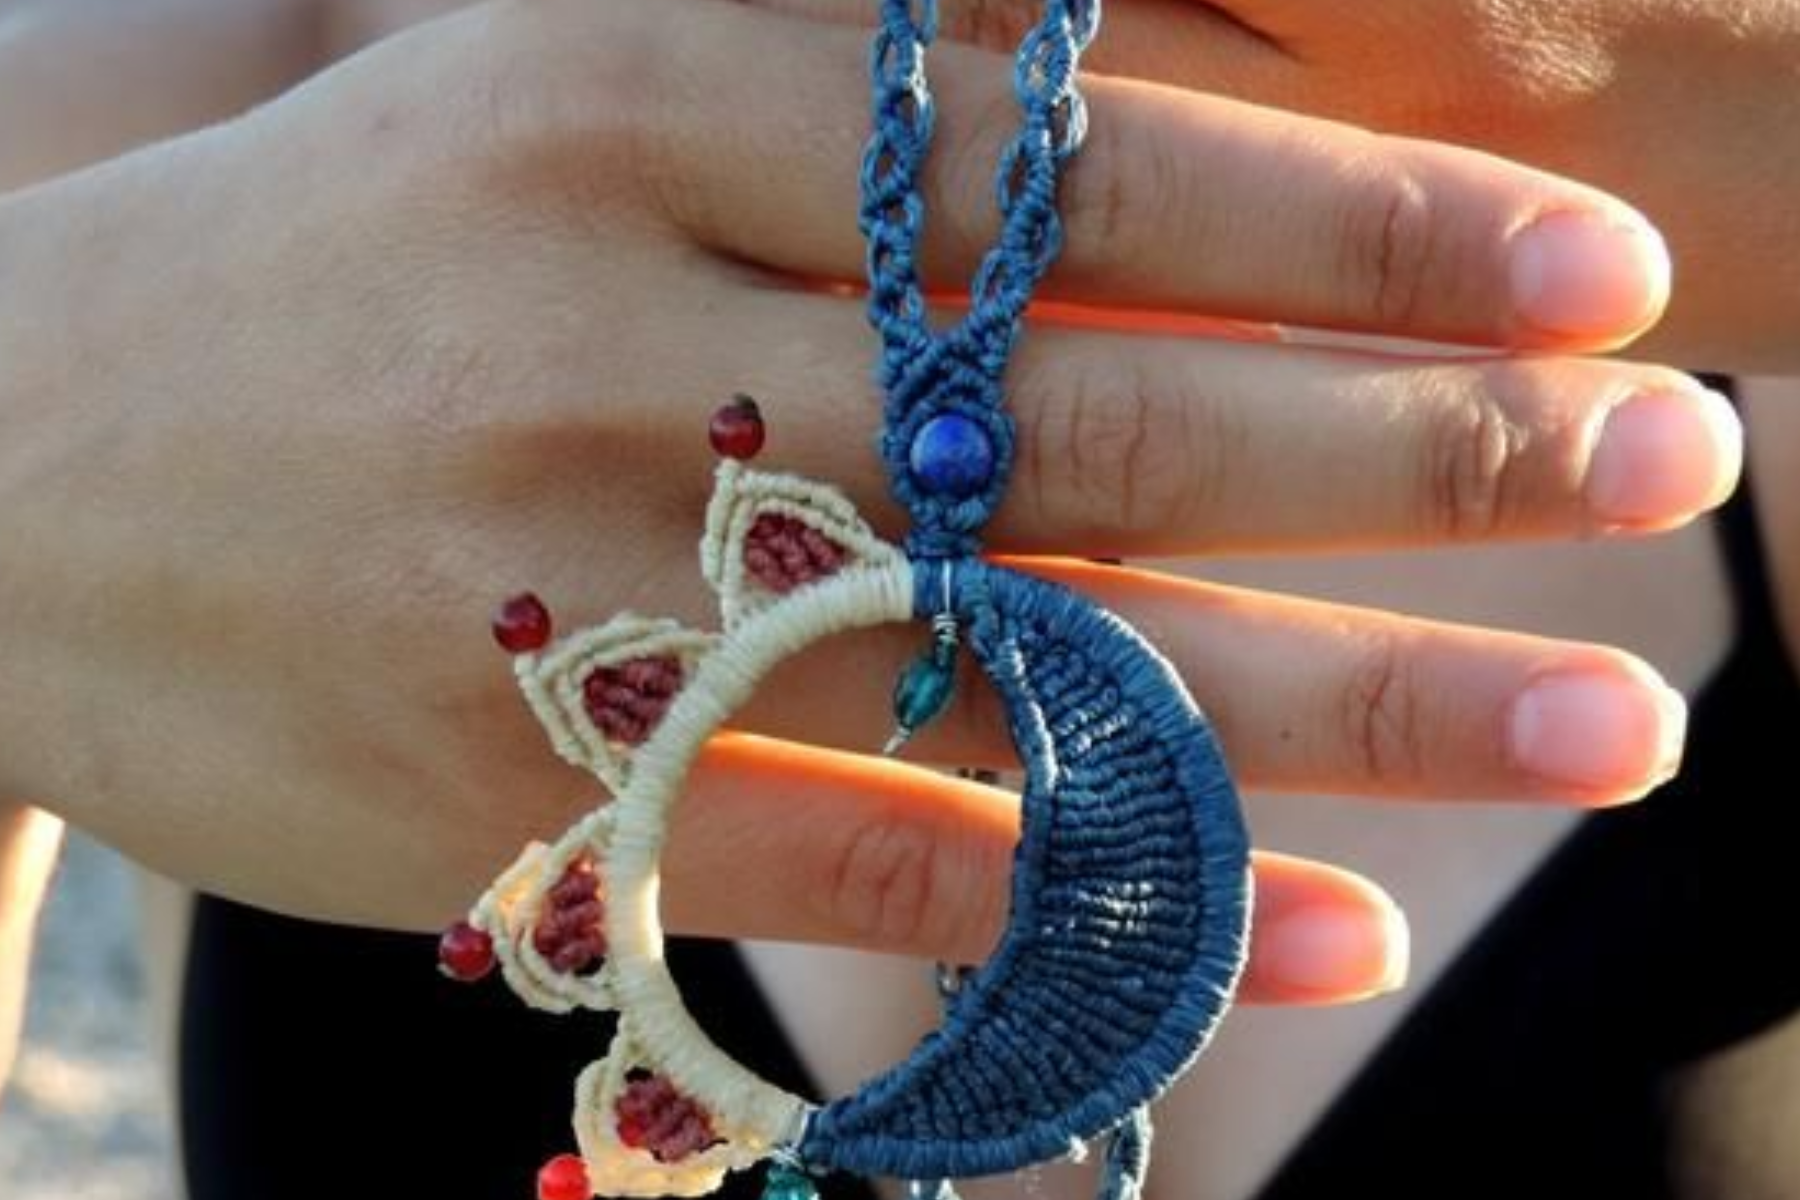 A woman's hand holding a handcrafted sun and moon necklace